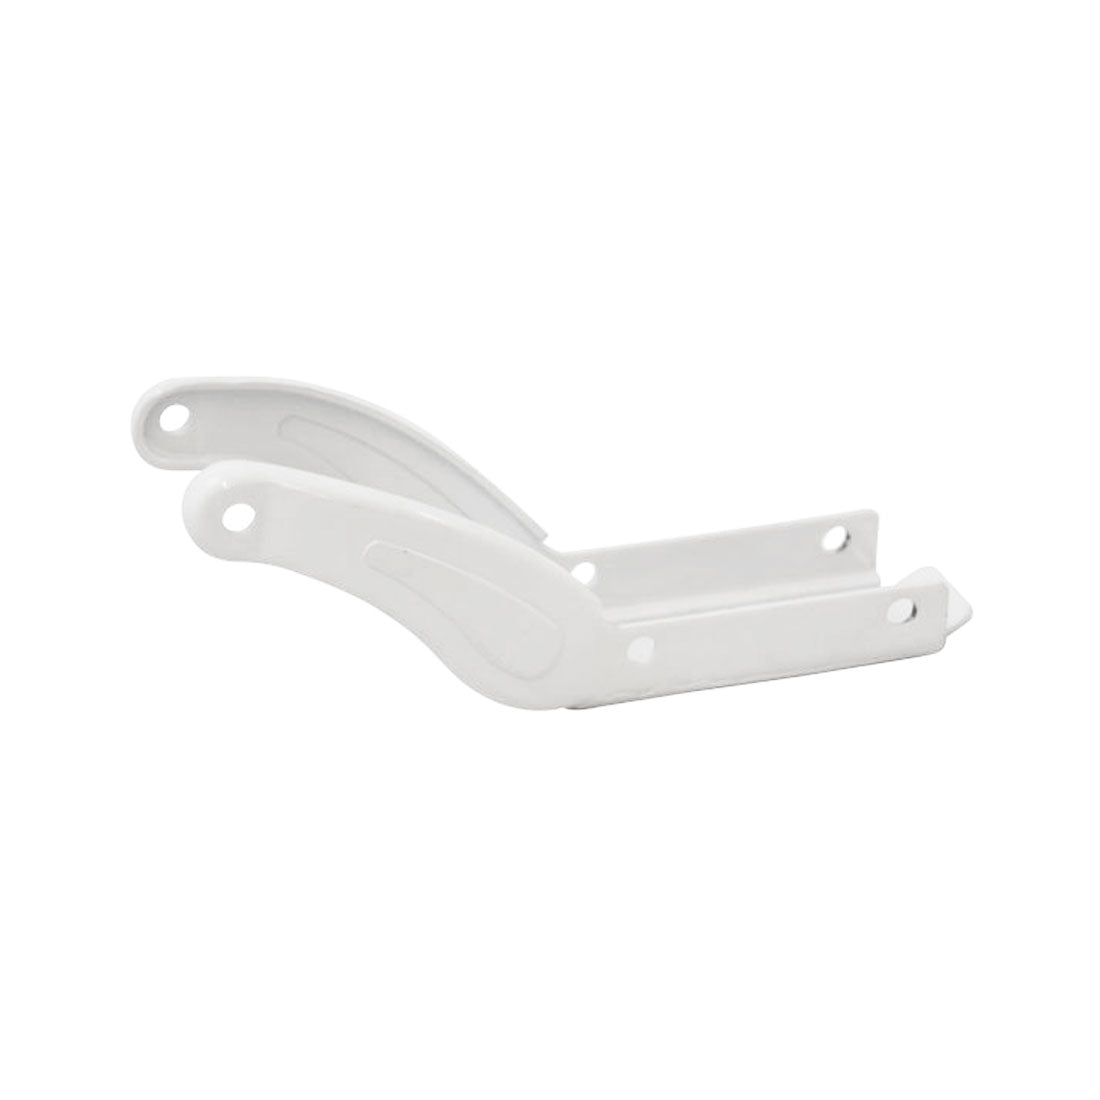 Micro White Rear Wheel Fastening Element - 1189 Scooter Hardware and Parts